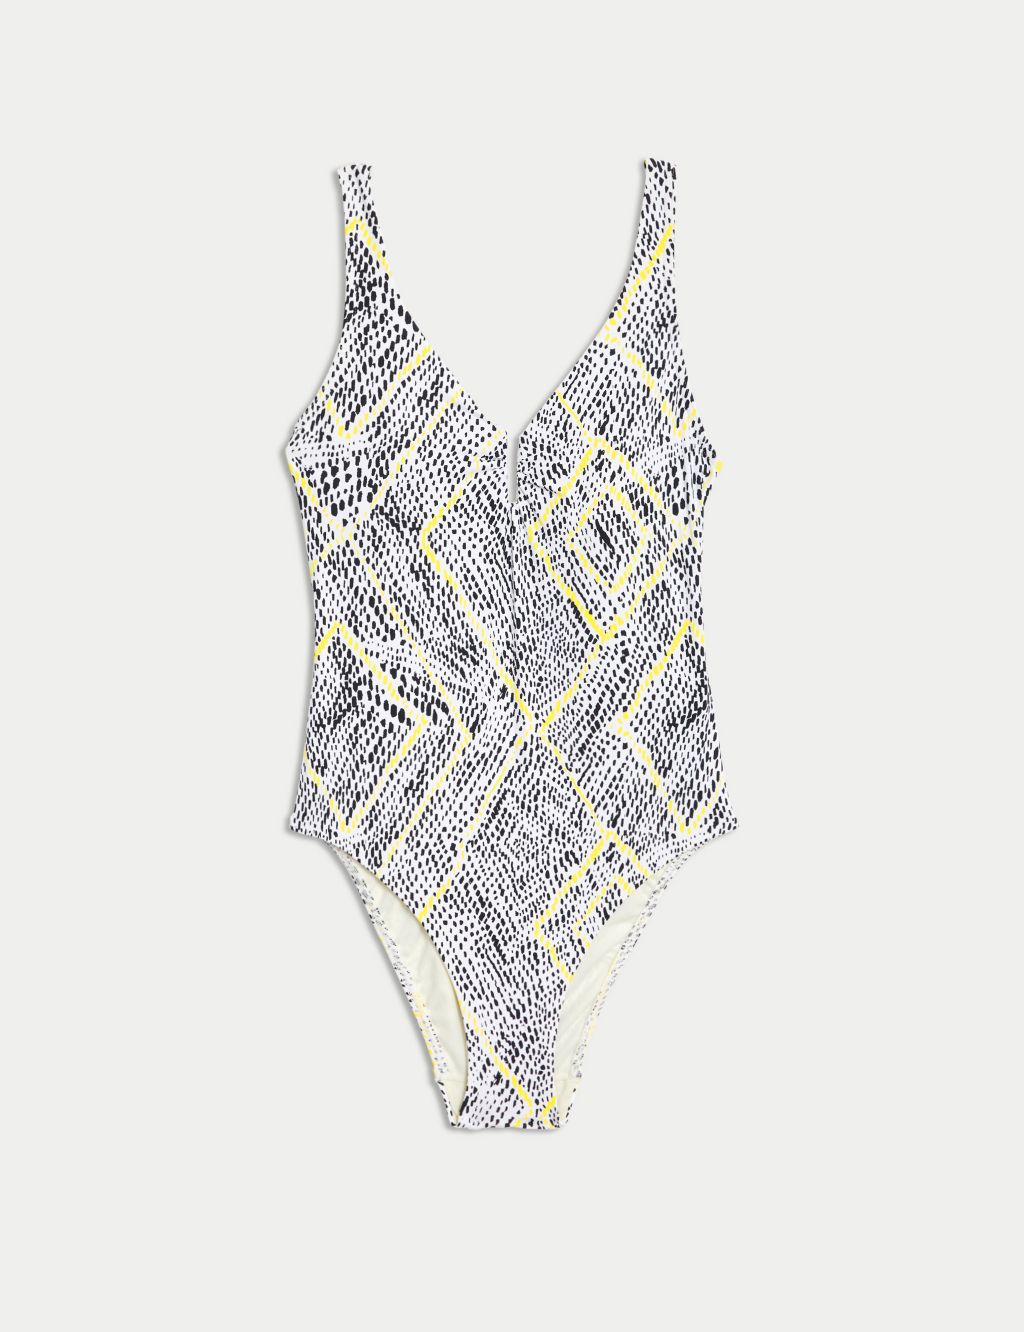 Tummy Control Printed Padded Swimsuit 1 of 5